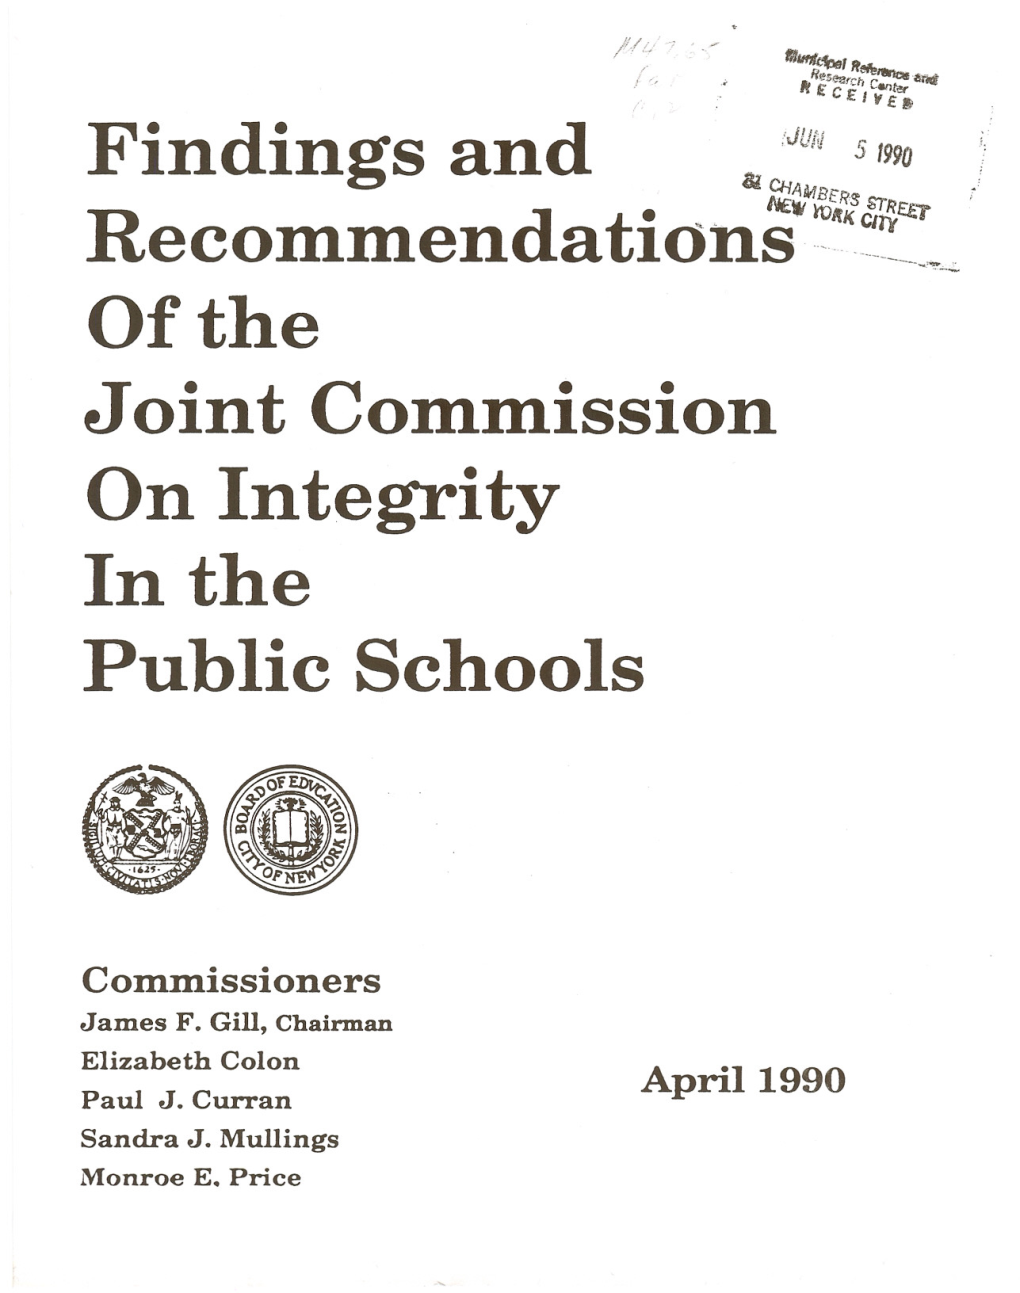 Findings and of the Joint Commission on Integrity in the Public Schools